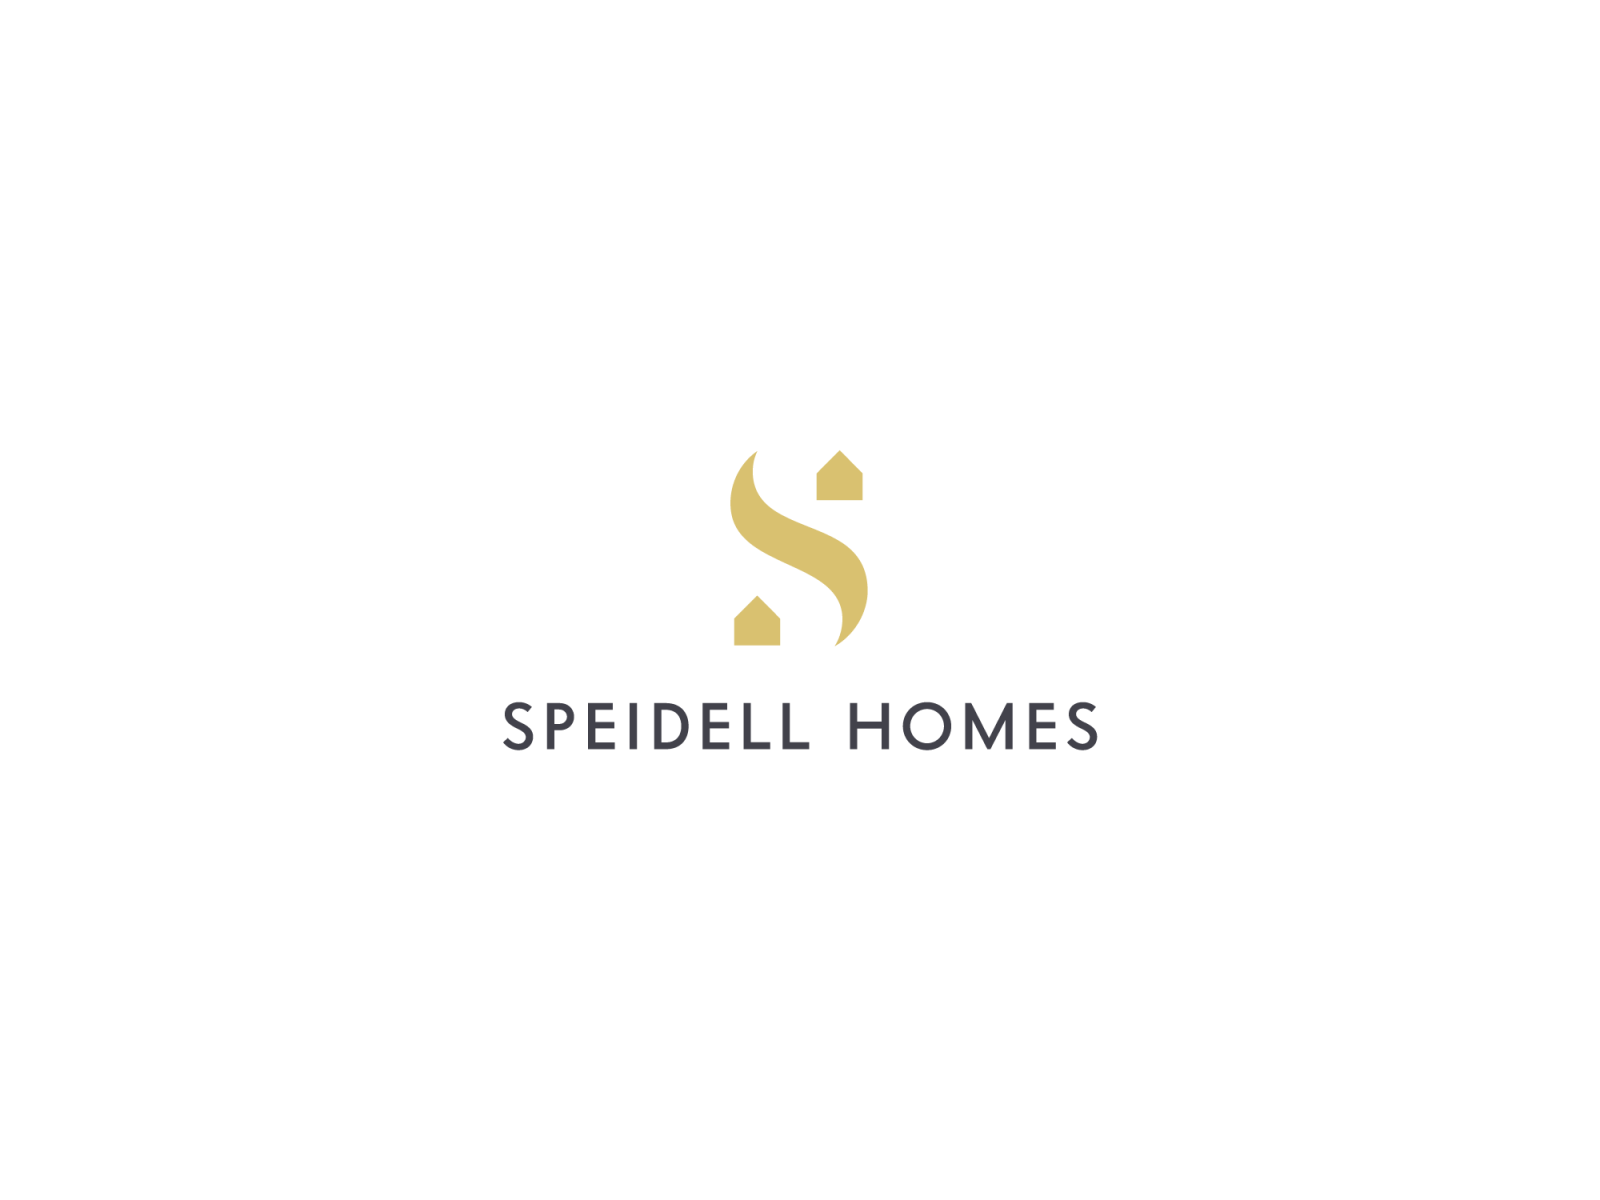 Speidell Homes by Roxana Niculescu on Dribbble